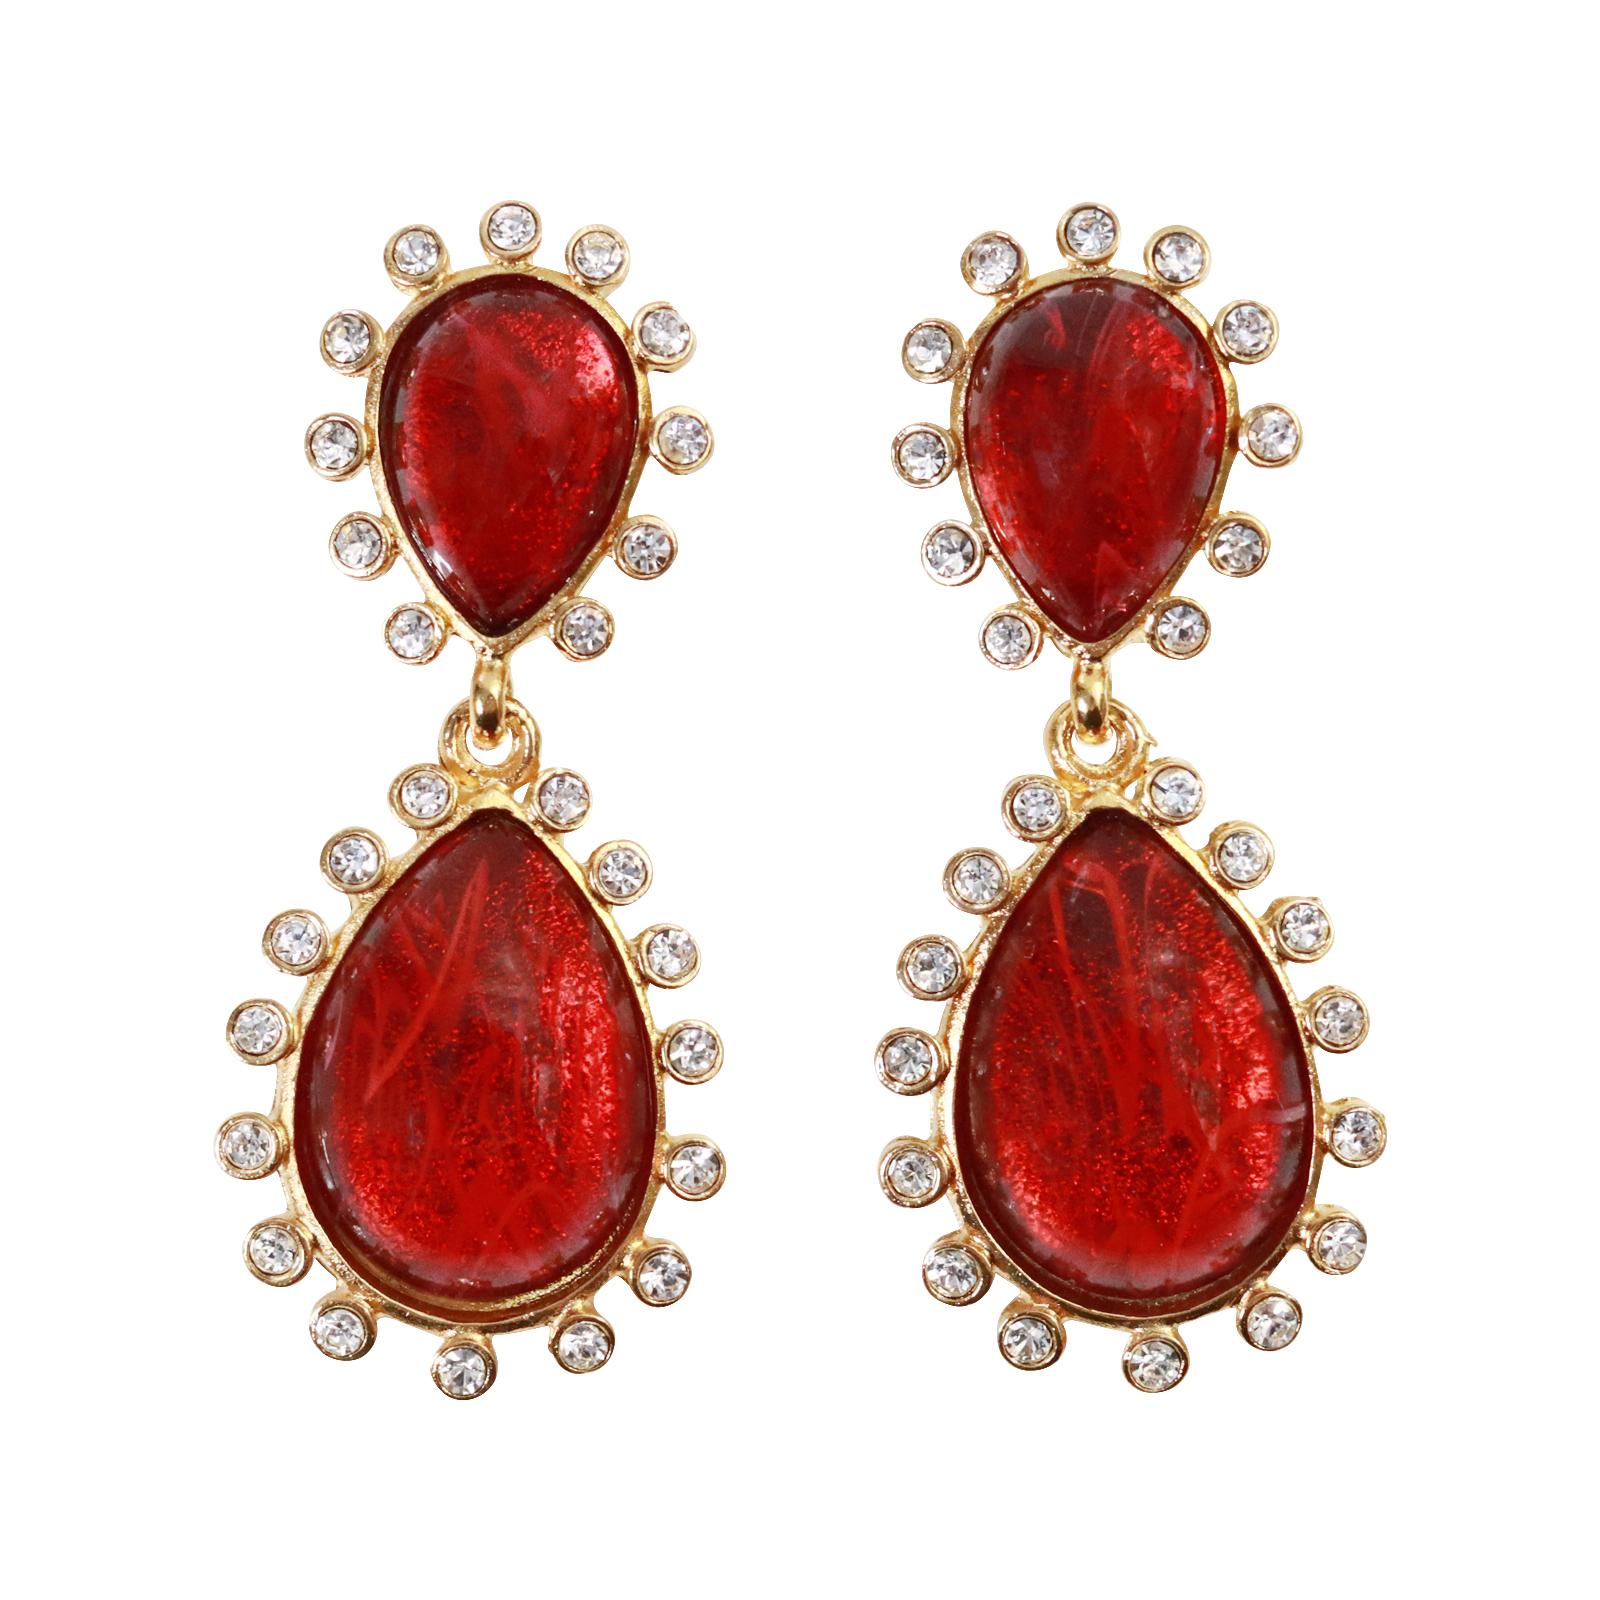 Collectible KJL Gold With Diamante Drop Red Resin Circa 2000s. These have quite the look.  These have a great look for a great price.  Clip on.  Substantial and well made.  The red looks so great against the gold tone color.

